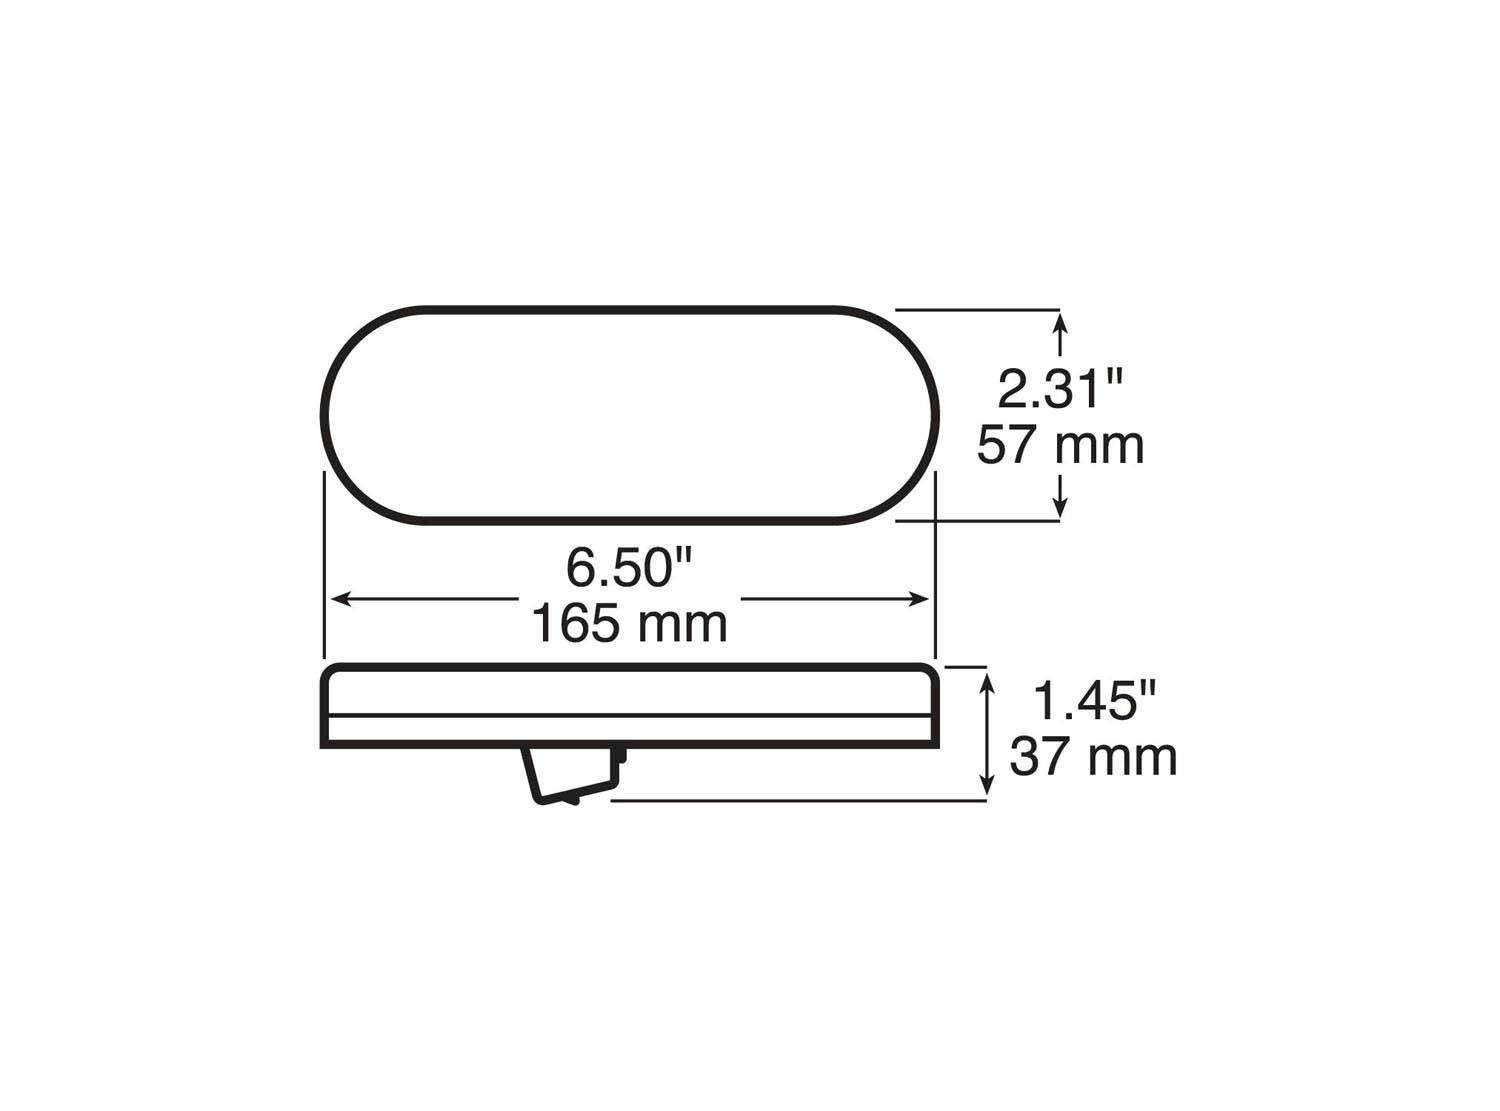 LED Stop/Turn/Tail, Oval, AMP, Grommet-Mount, 6.5"X2.25", Multi-volt, red, bulk pack (Pack of 50) - 820-3_line_dual_2view-BX5_c68f7629-98ce-44b9-b9ac-33b5ff04f401